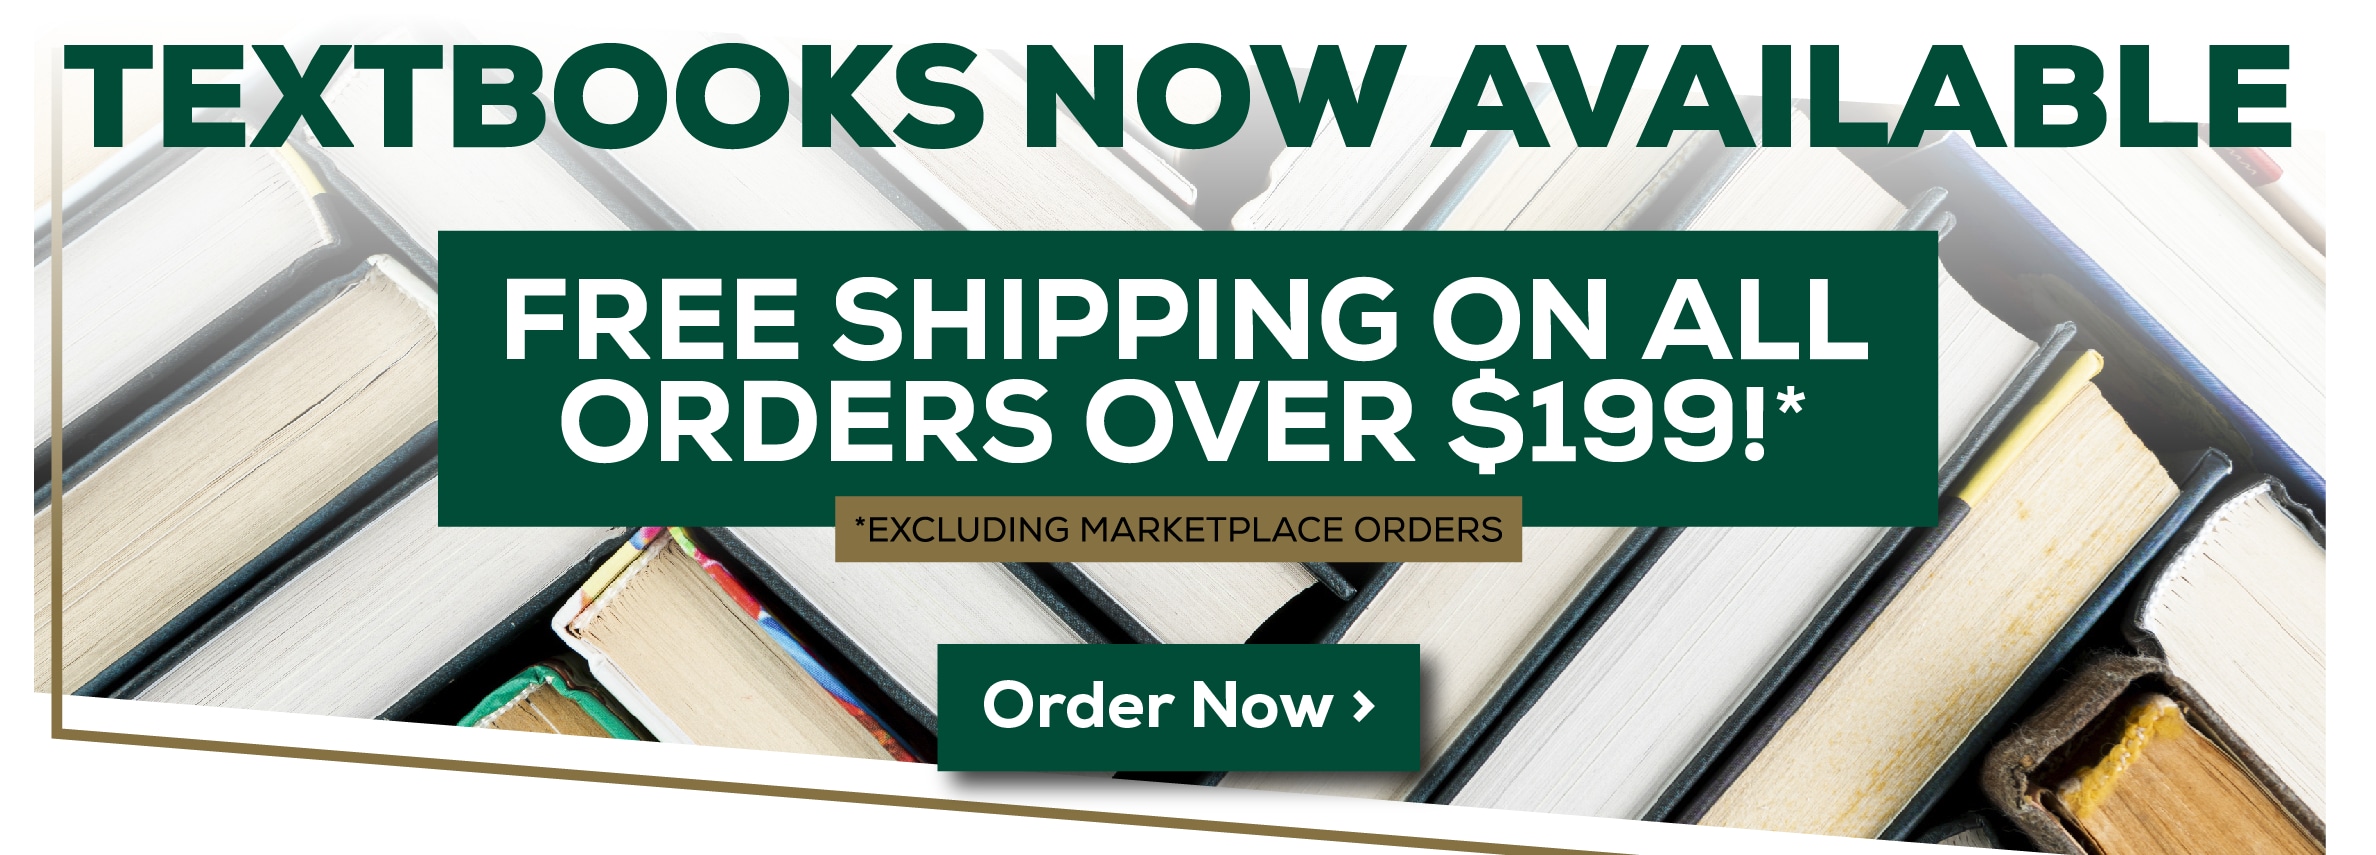 Textbooks Now Available! Free Shipping on all orders over $199* *Excluding Marketplace Orders. Order Now.